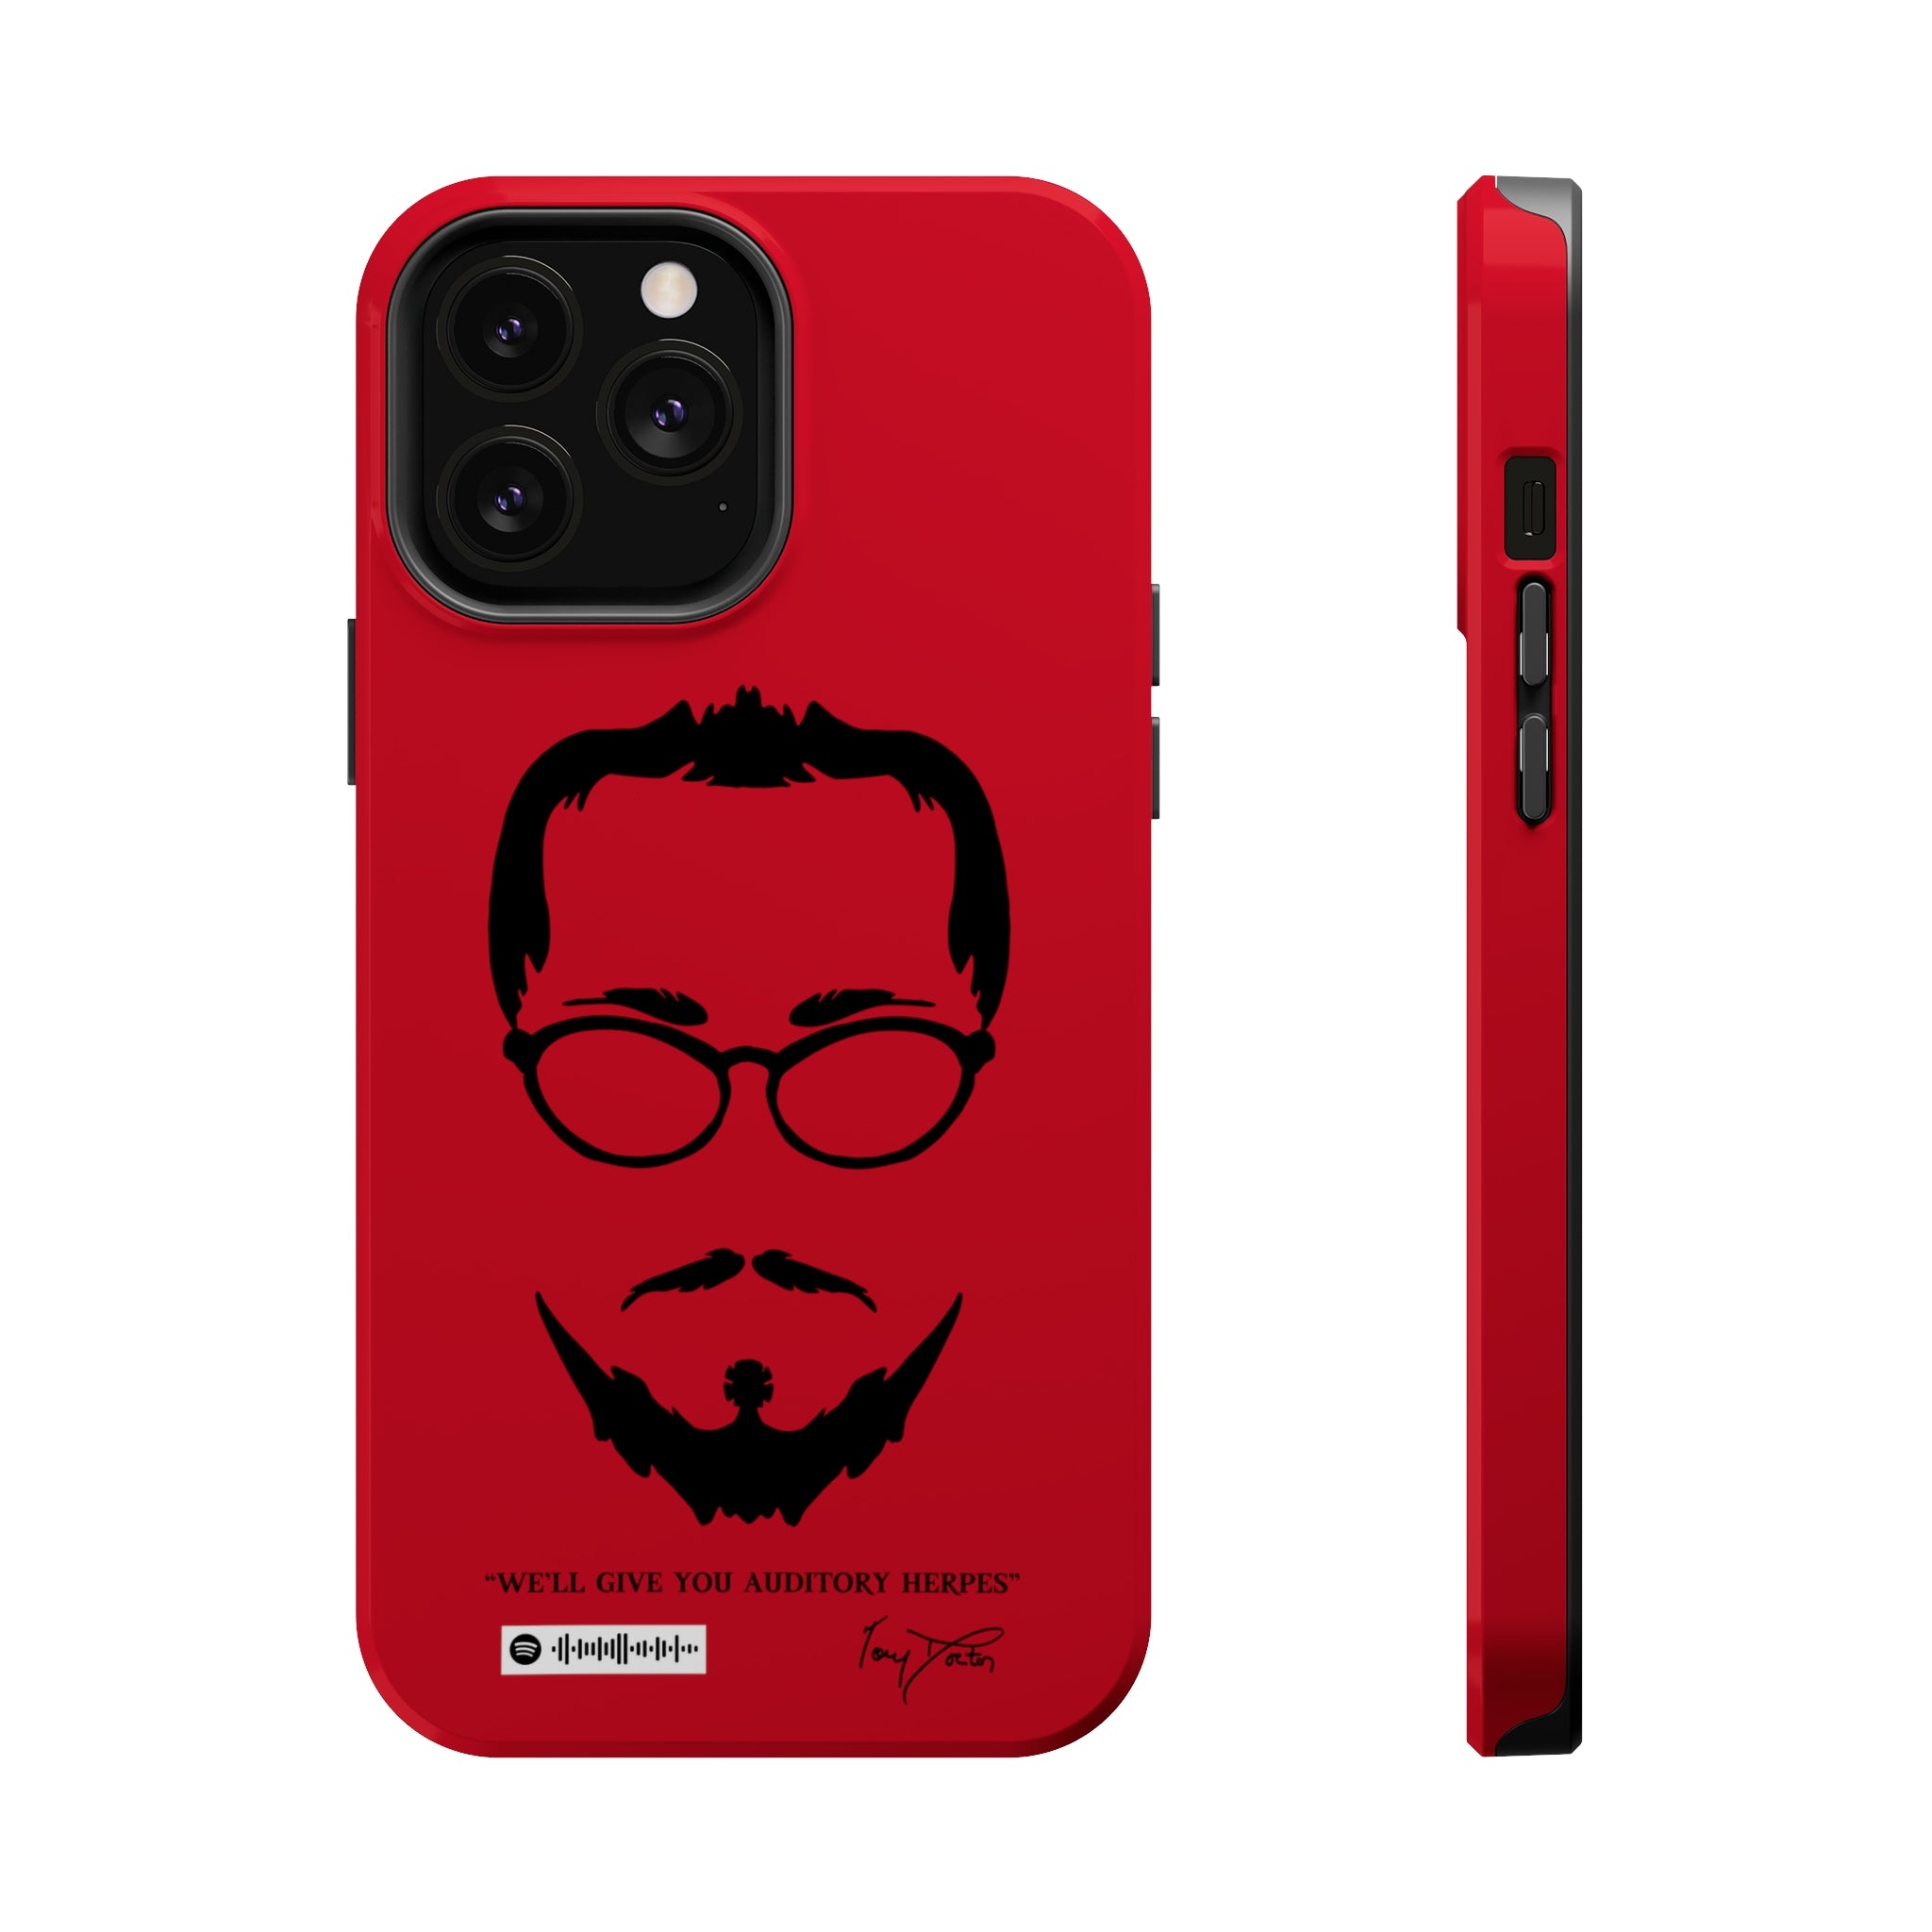 Tory Doctor's "Auditory Herpes" MagSafe Tough iPhone Case - Red and Black